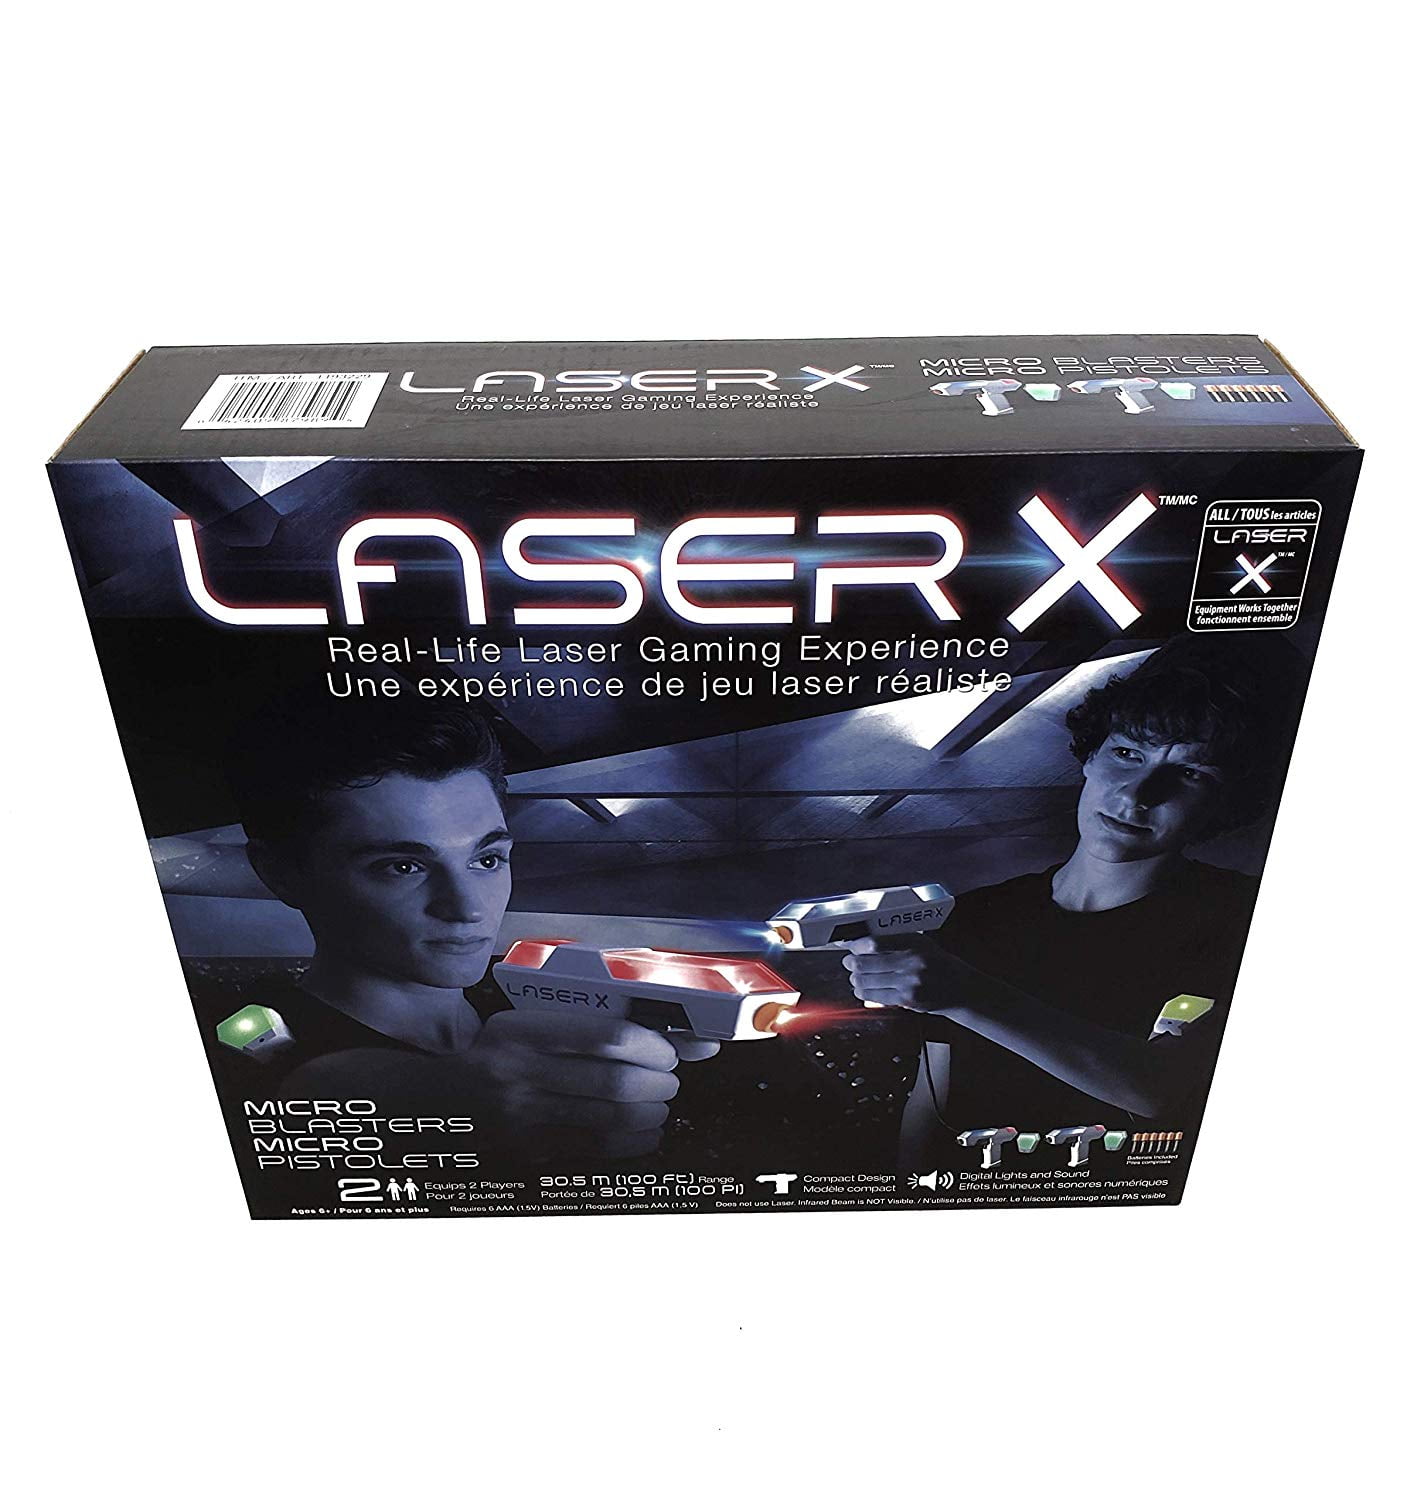 NEW Laser X Micro Blasters Real-Life Laser Gaming Experience Equips 4 Players